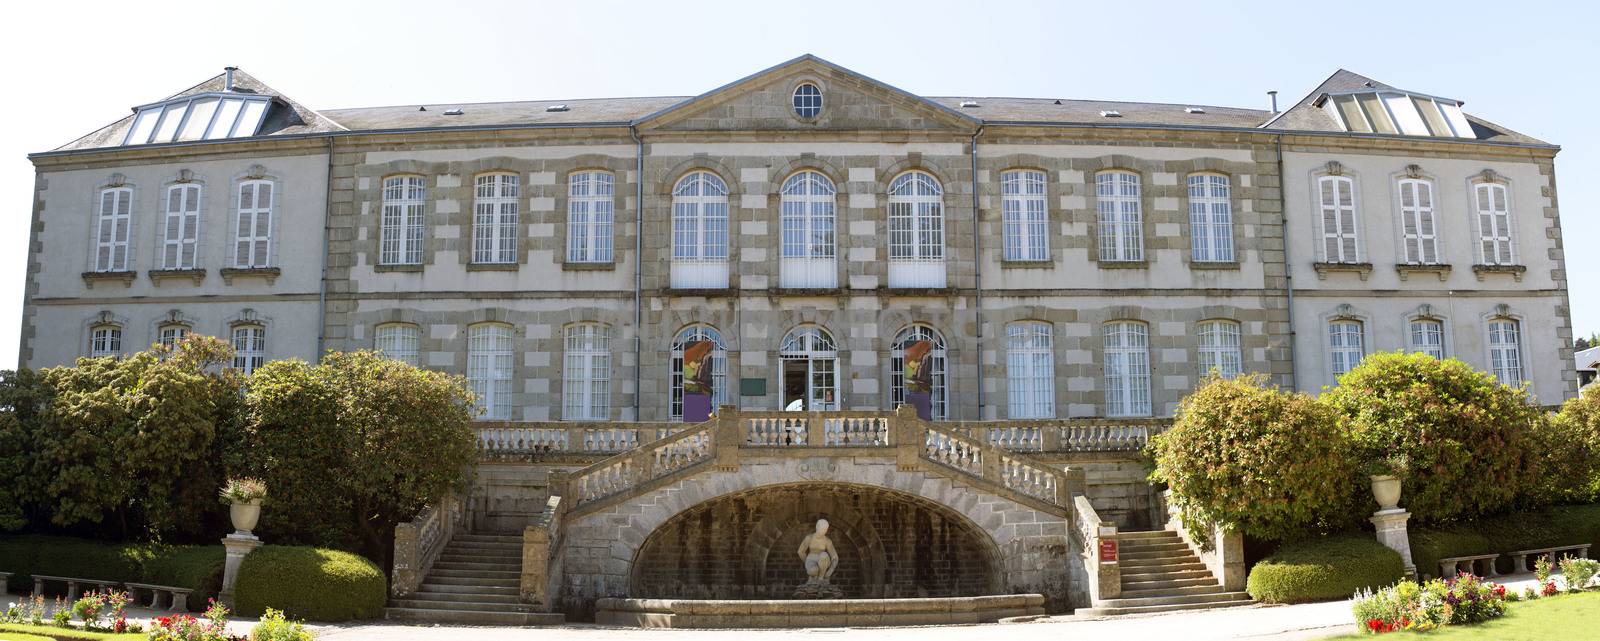 art gallery of Gueret in the Creuse, Limousin, France